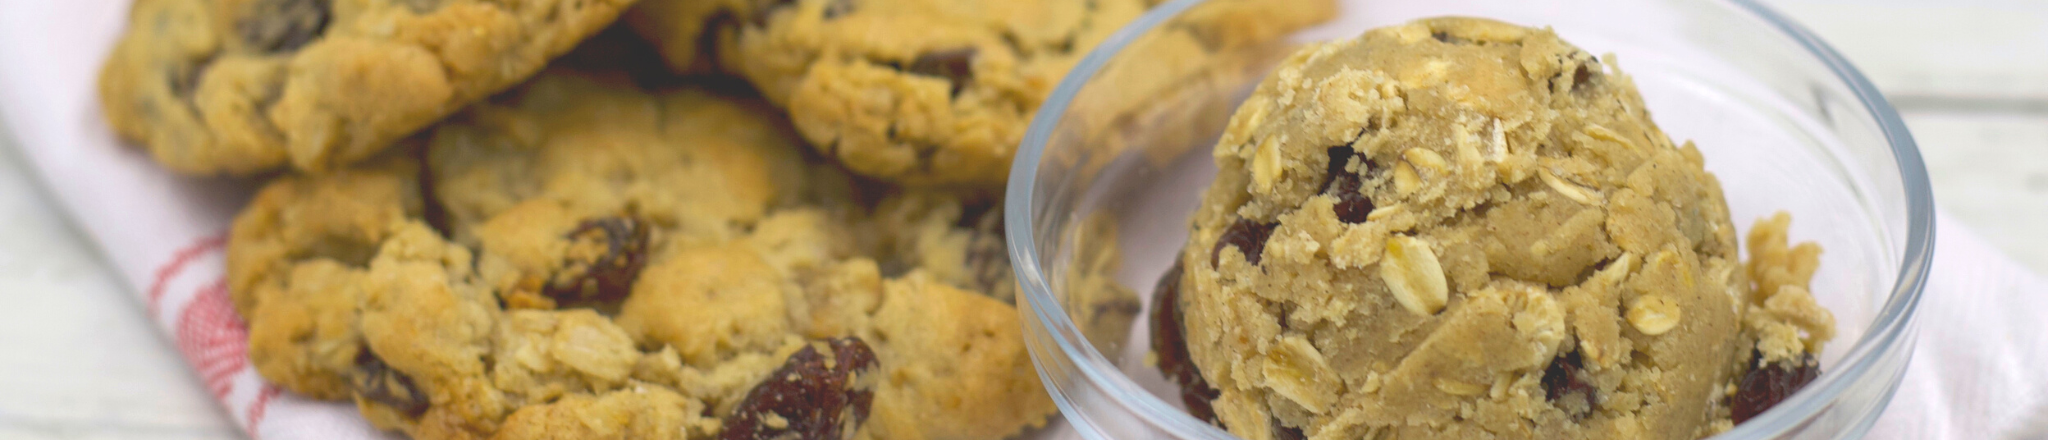 LET'S MAKE SOME EDIBLE COOKIE DOUGH & BAKE COOKIES – WATCH HOW EASY IT IS!